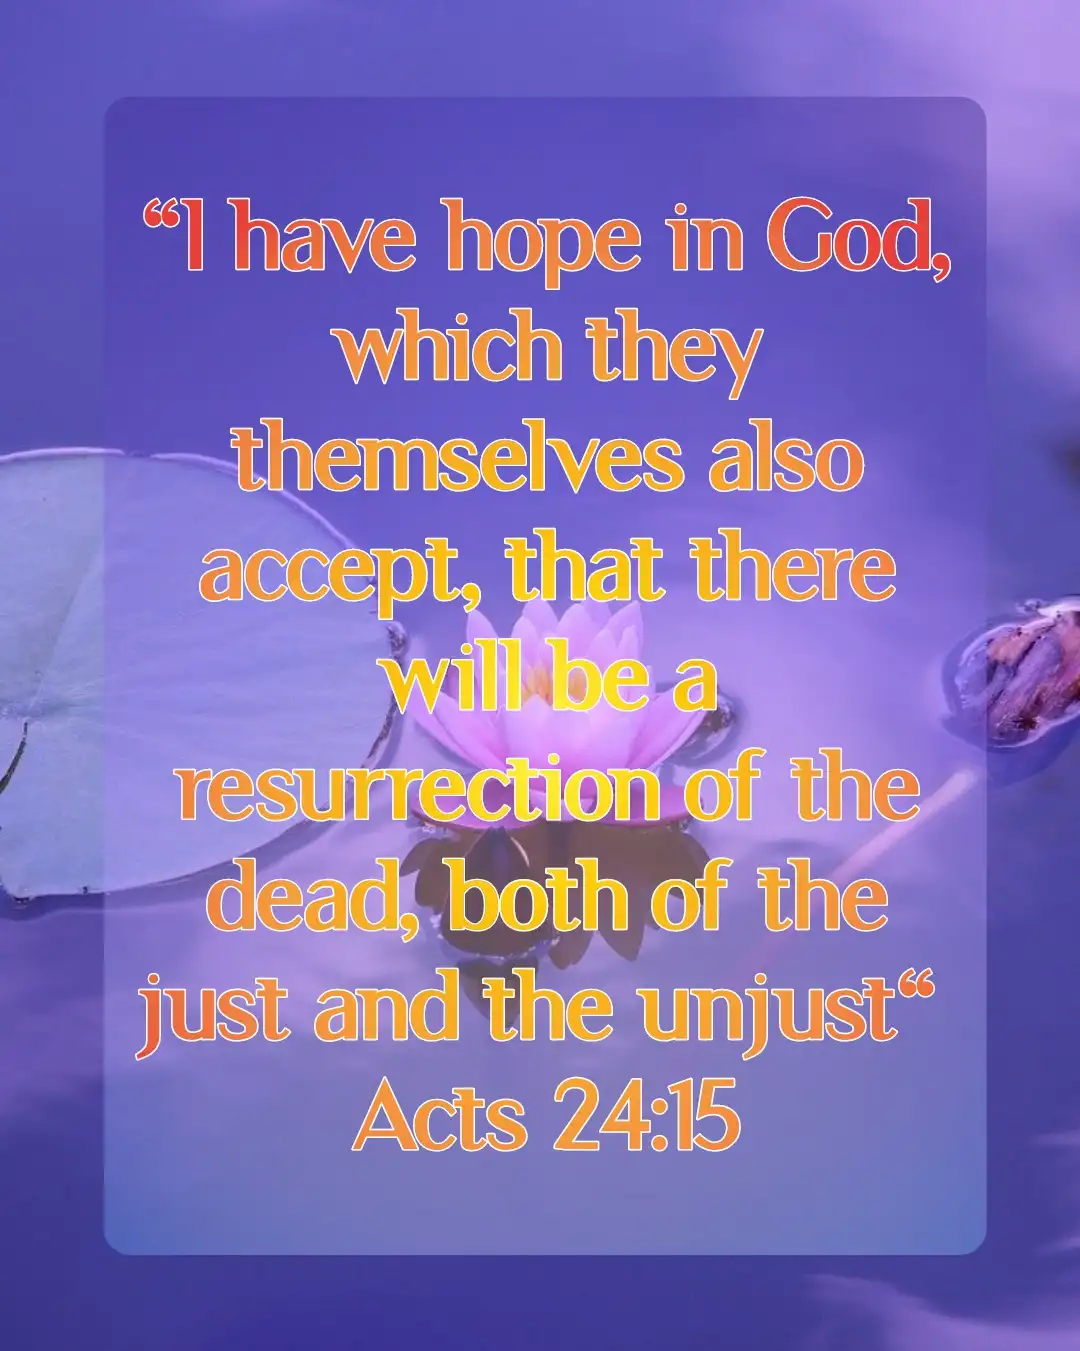 Bible verse about hope for the future (Acts 24:15)